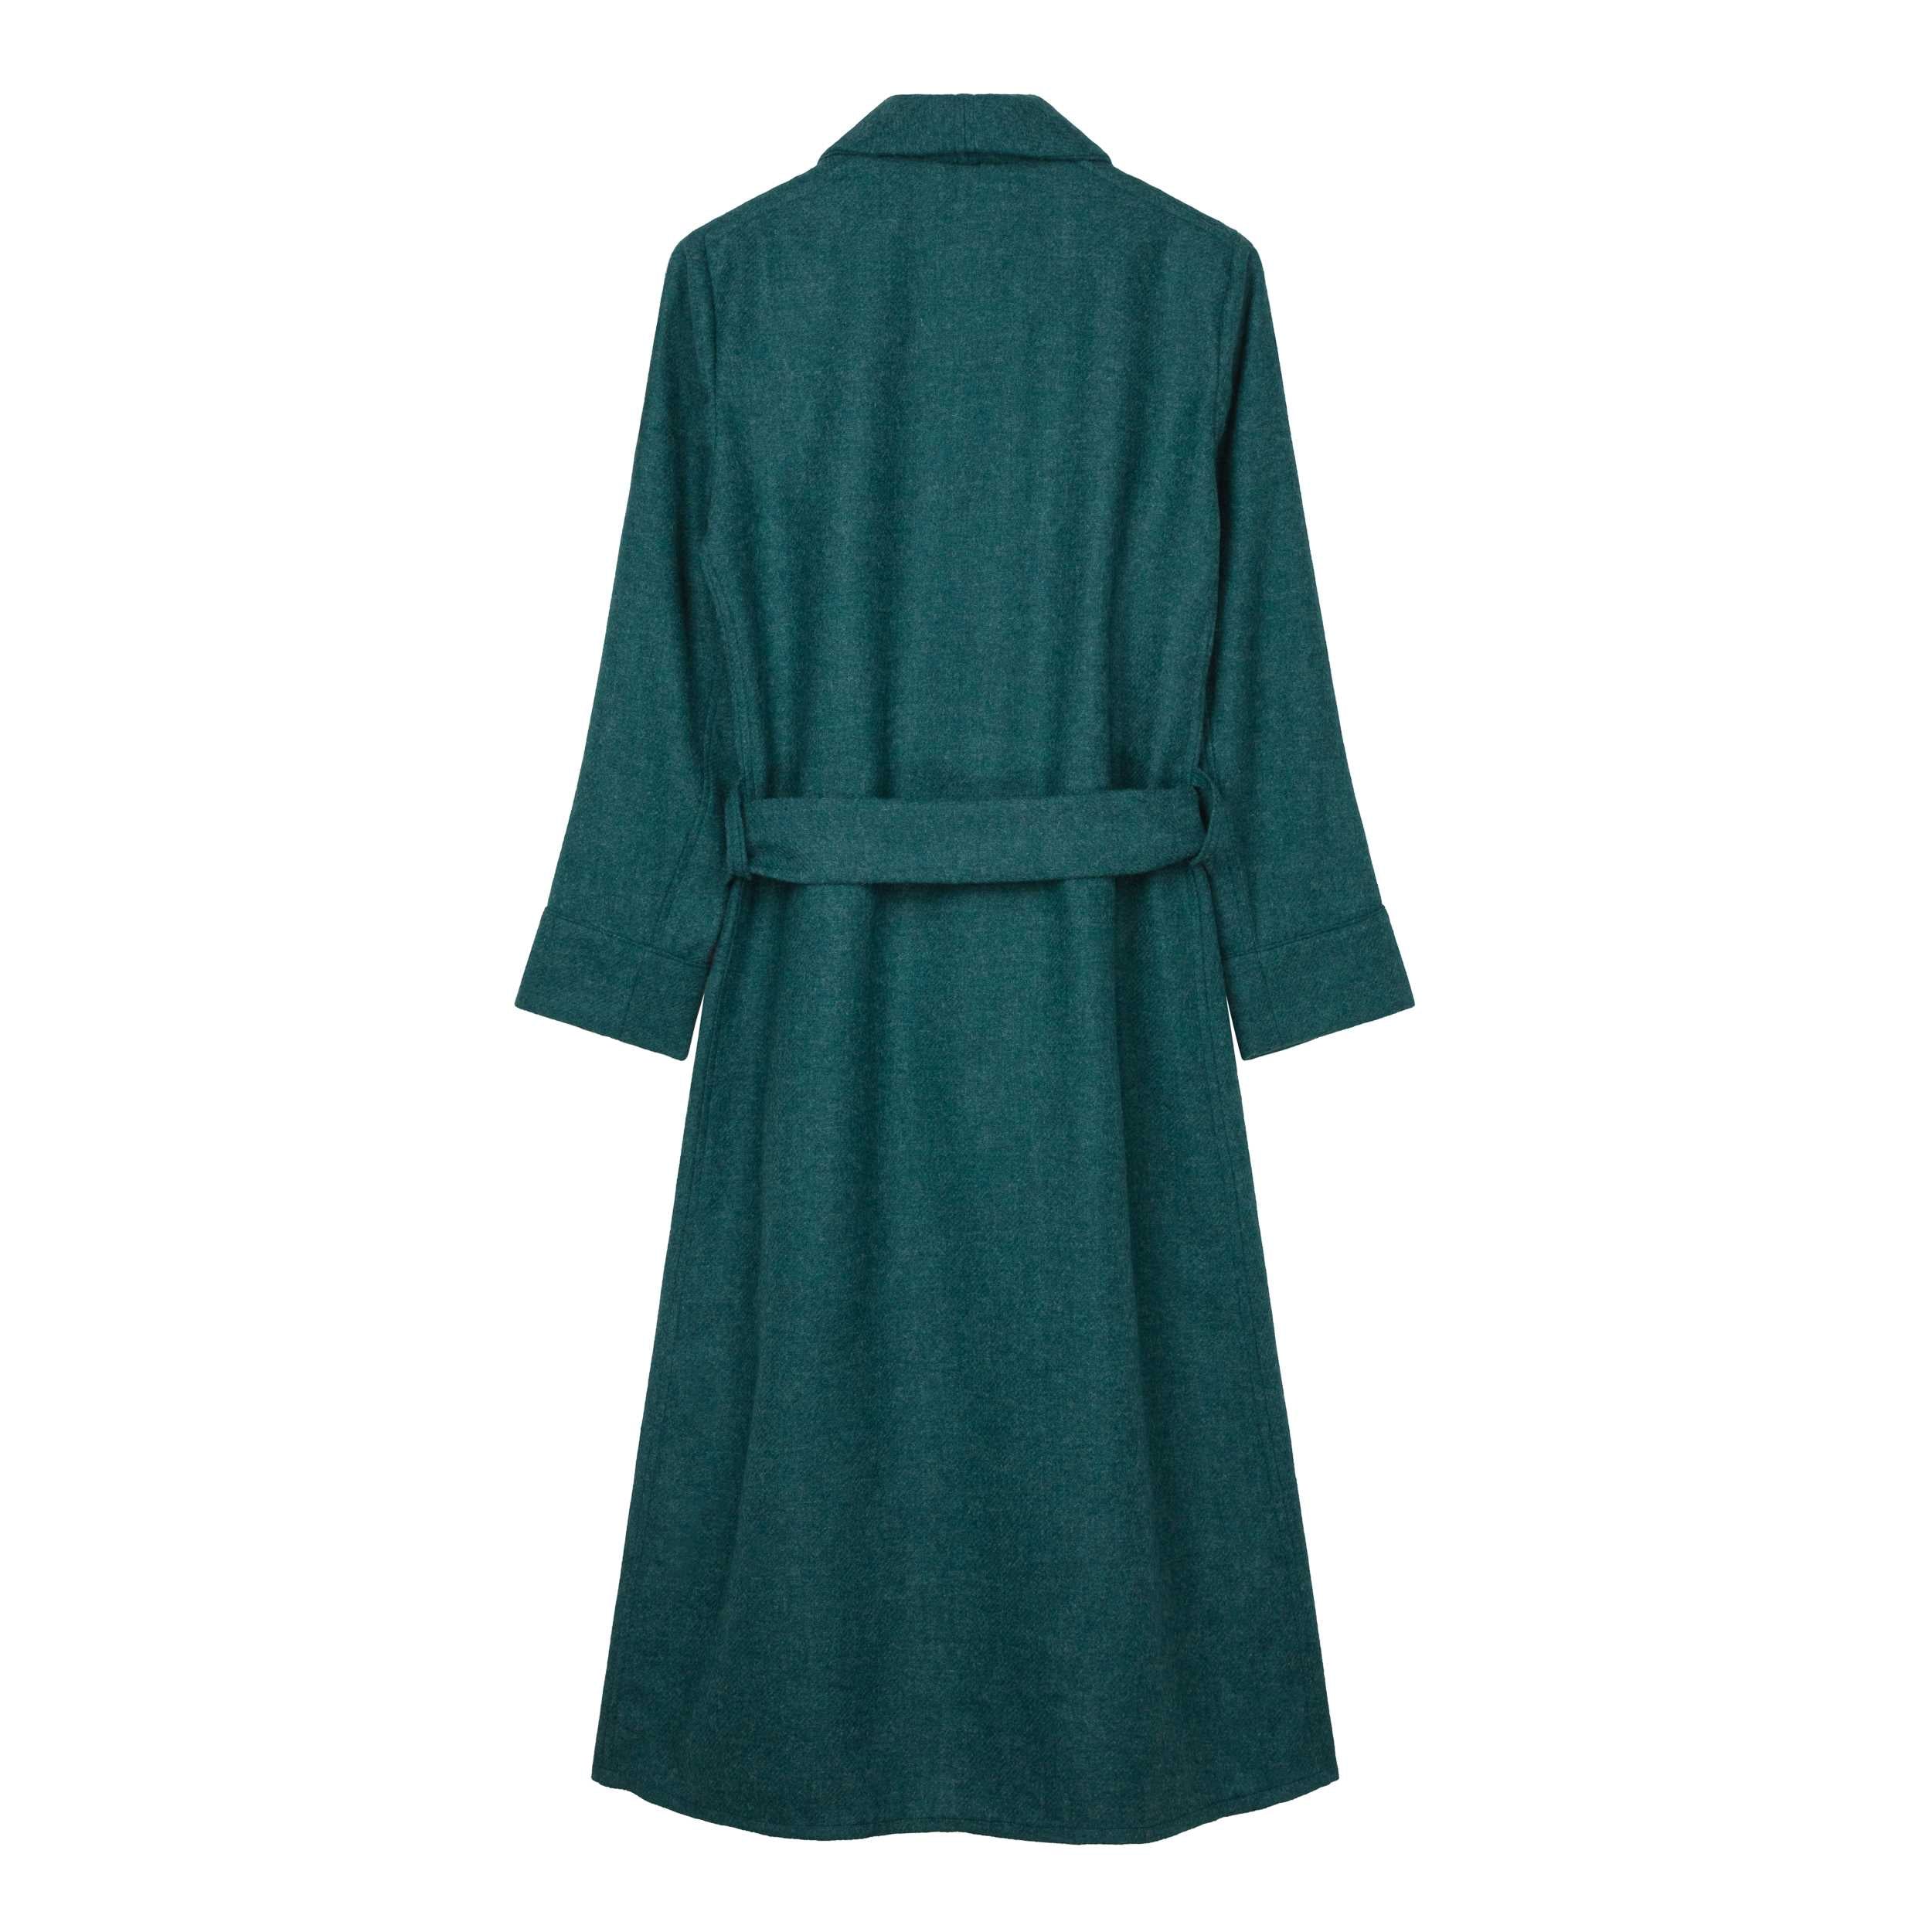 Carrier Company Luxurious Wool Dressing Gown in New Teal